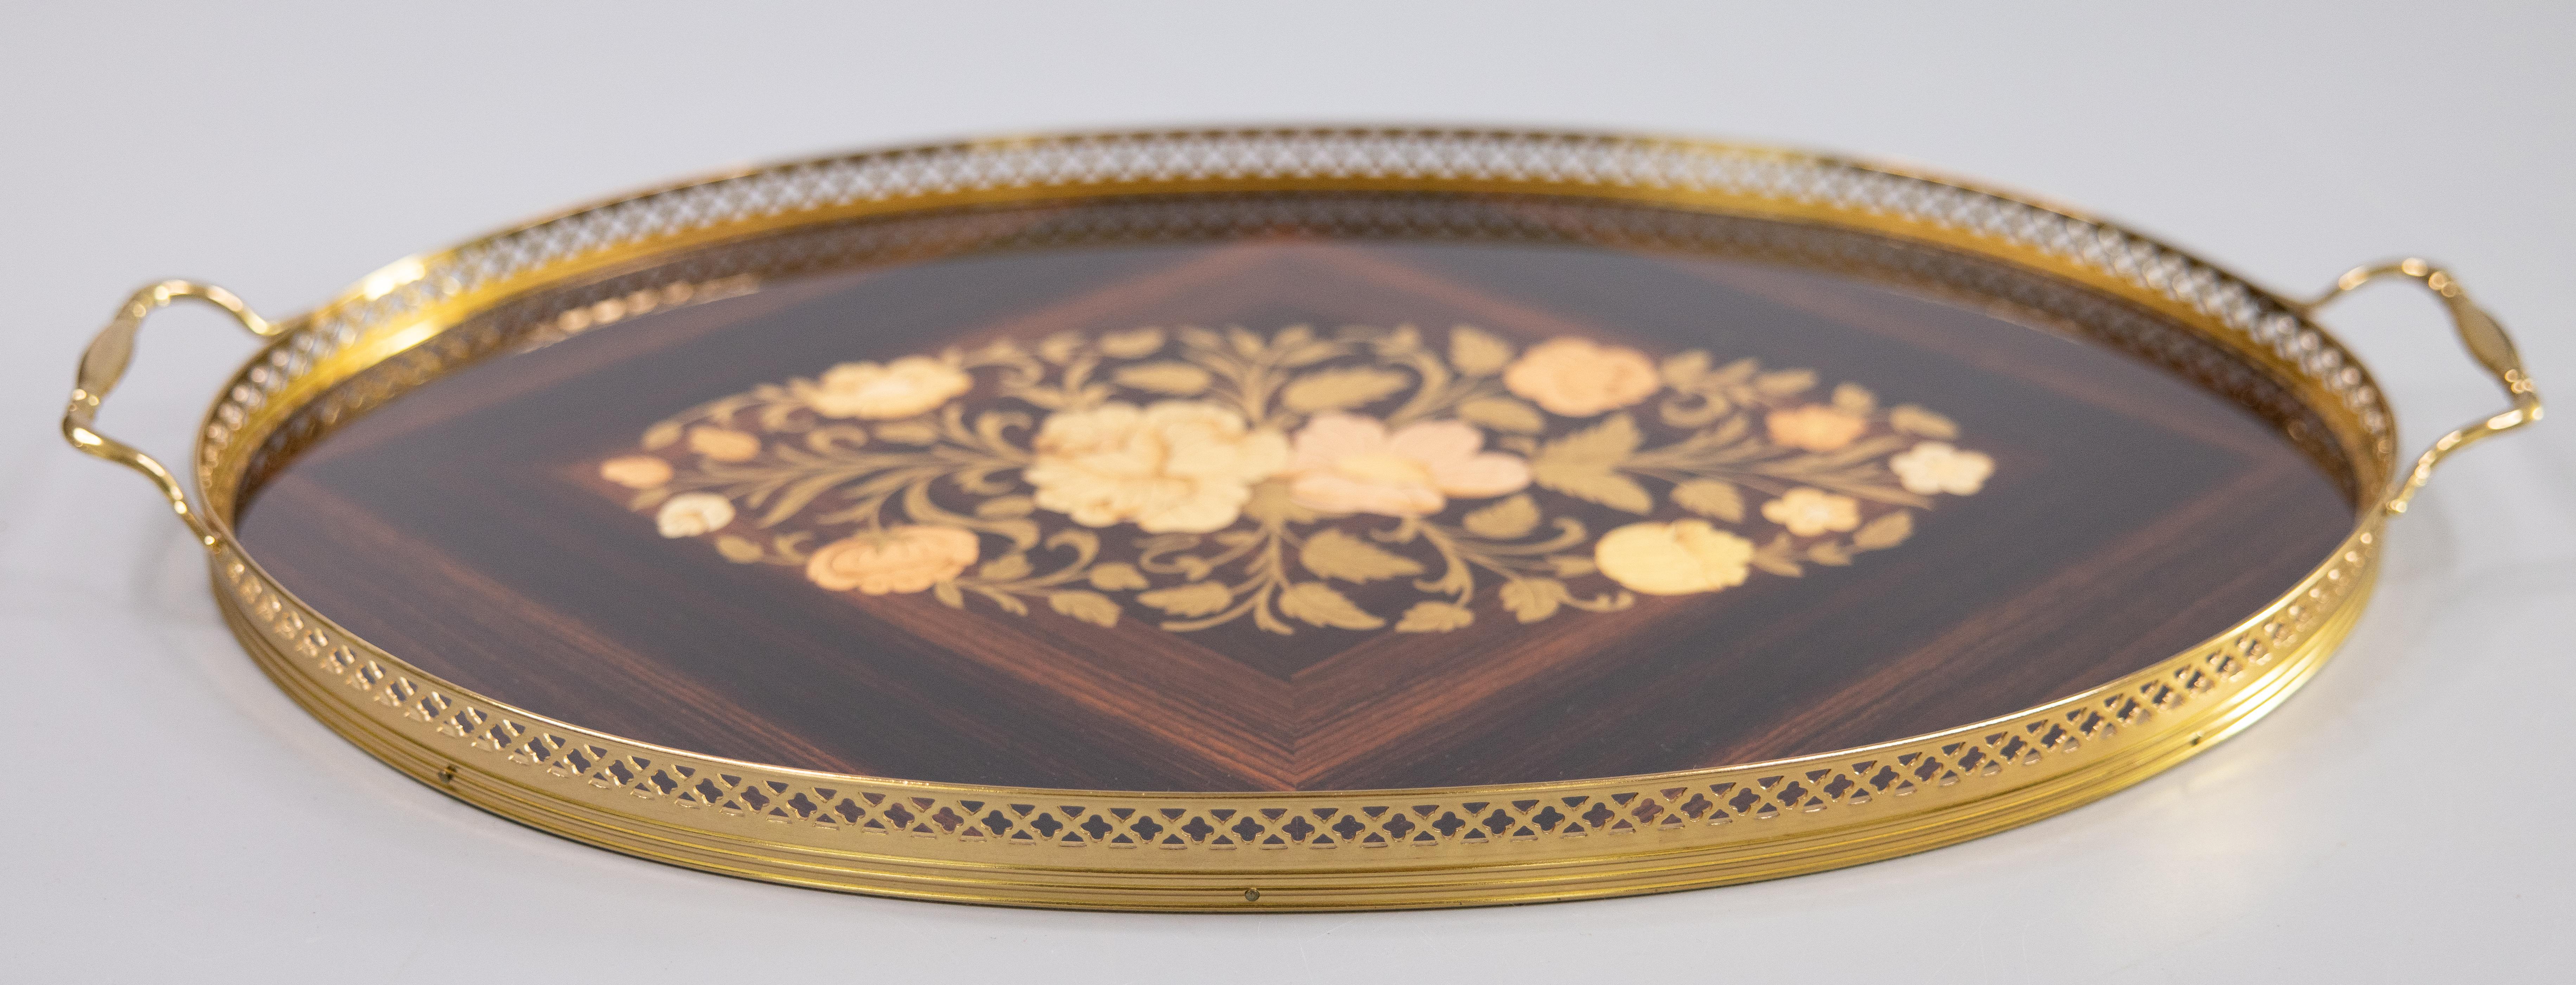 Inlay Italian Marquetry Inlaid Rosewood & Brass Gallery Oval Serving Tray, circa 1950